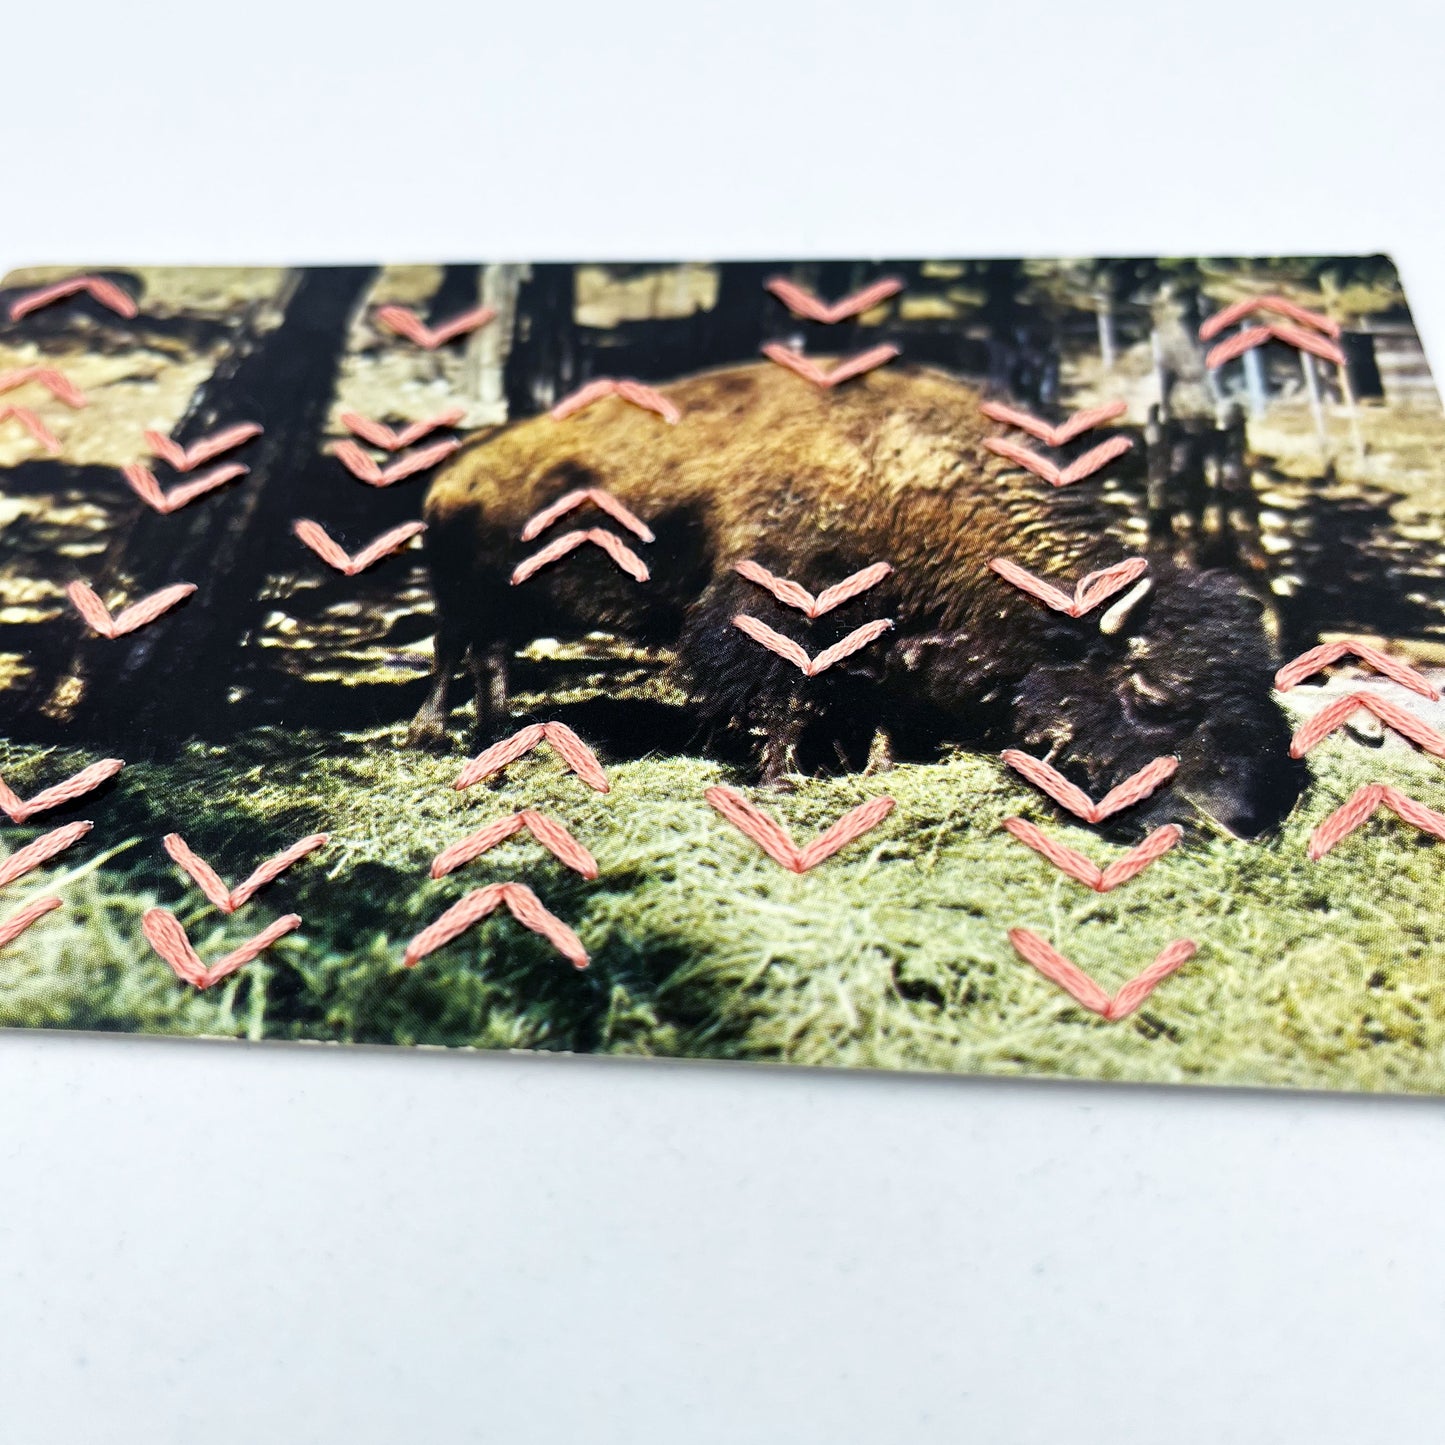 vintage postcard of a buffalo grazing in a forest, with hand stitched rows of small irregularly placed chevrons in peach thread